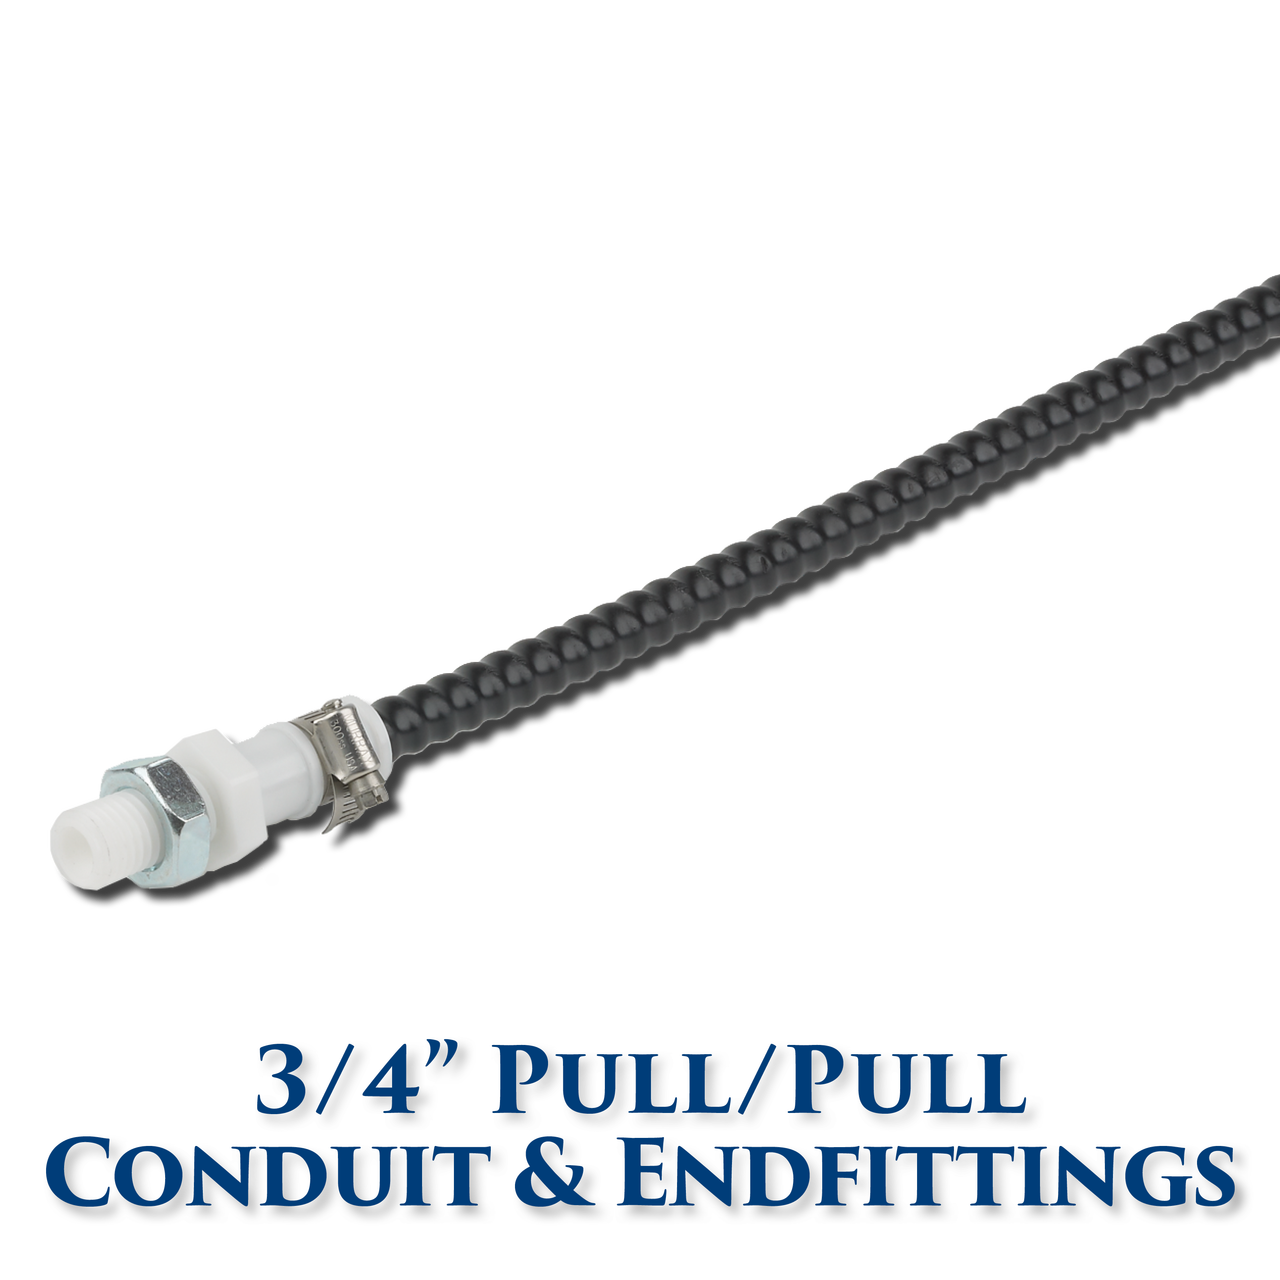 https://cdn11.bigcommerce.com/s-a3x5y9g98l/images/stencil/1280x1280/products/357/1957/3-4th_inch_Conduit_Endfittings__87435.1611331907.png?c=2